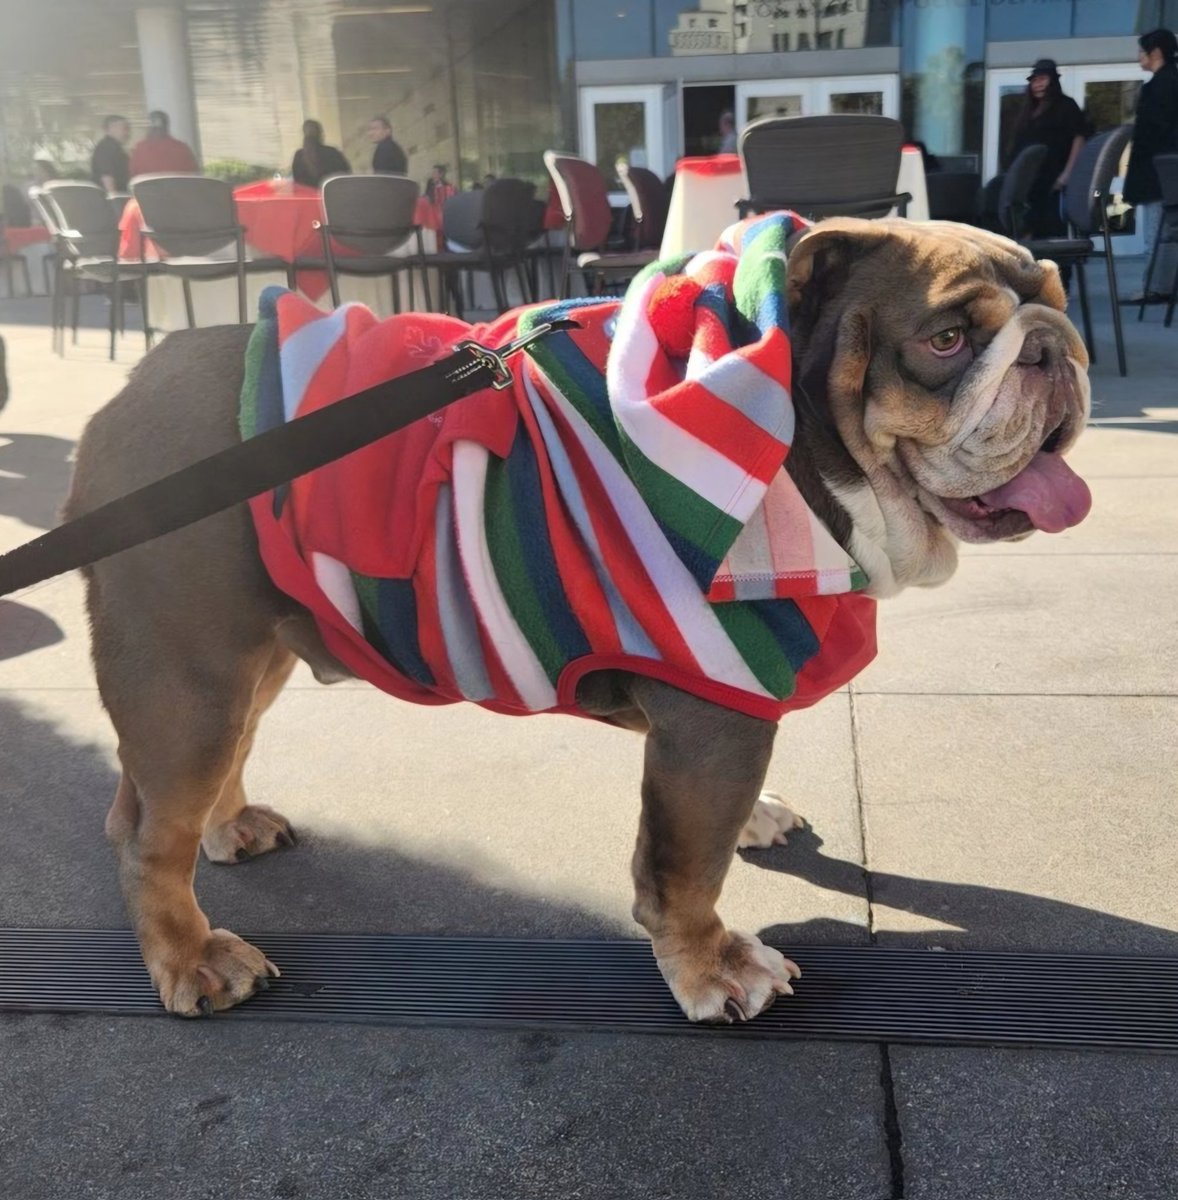 gogophotocontest.com/howlingheroes/… please consider voting for Roy, the Lilac Bulldog to be the next Mascot for #LAFD @lafd @LAFDFoundation #KTLA #Dog #Doglovers #bulldog